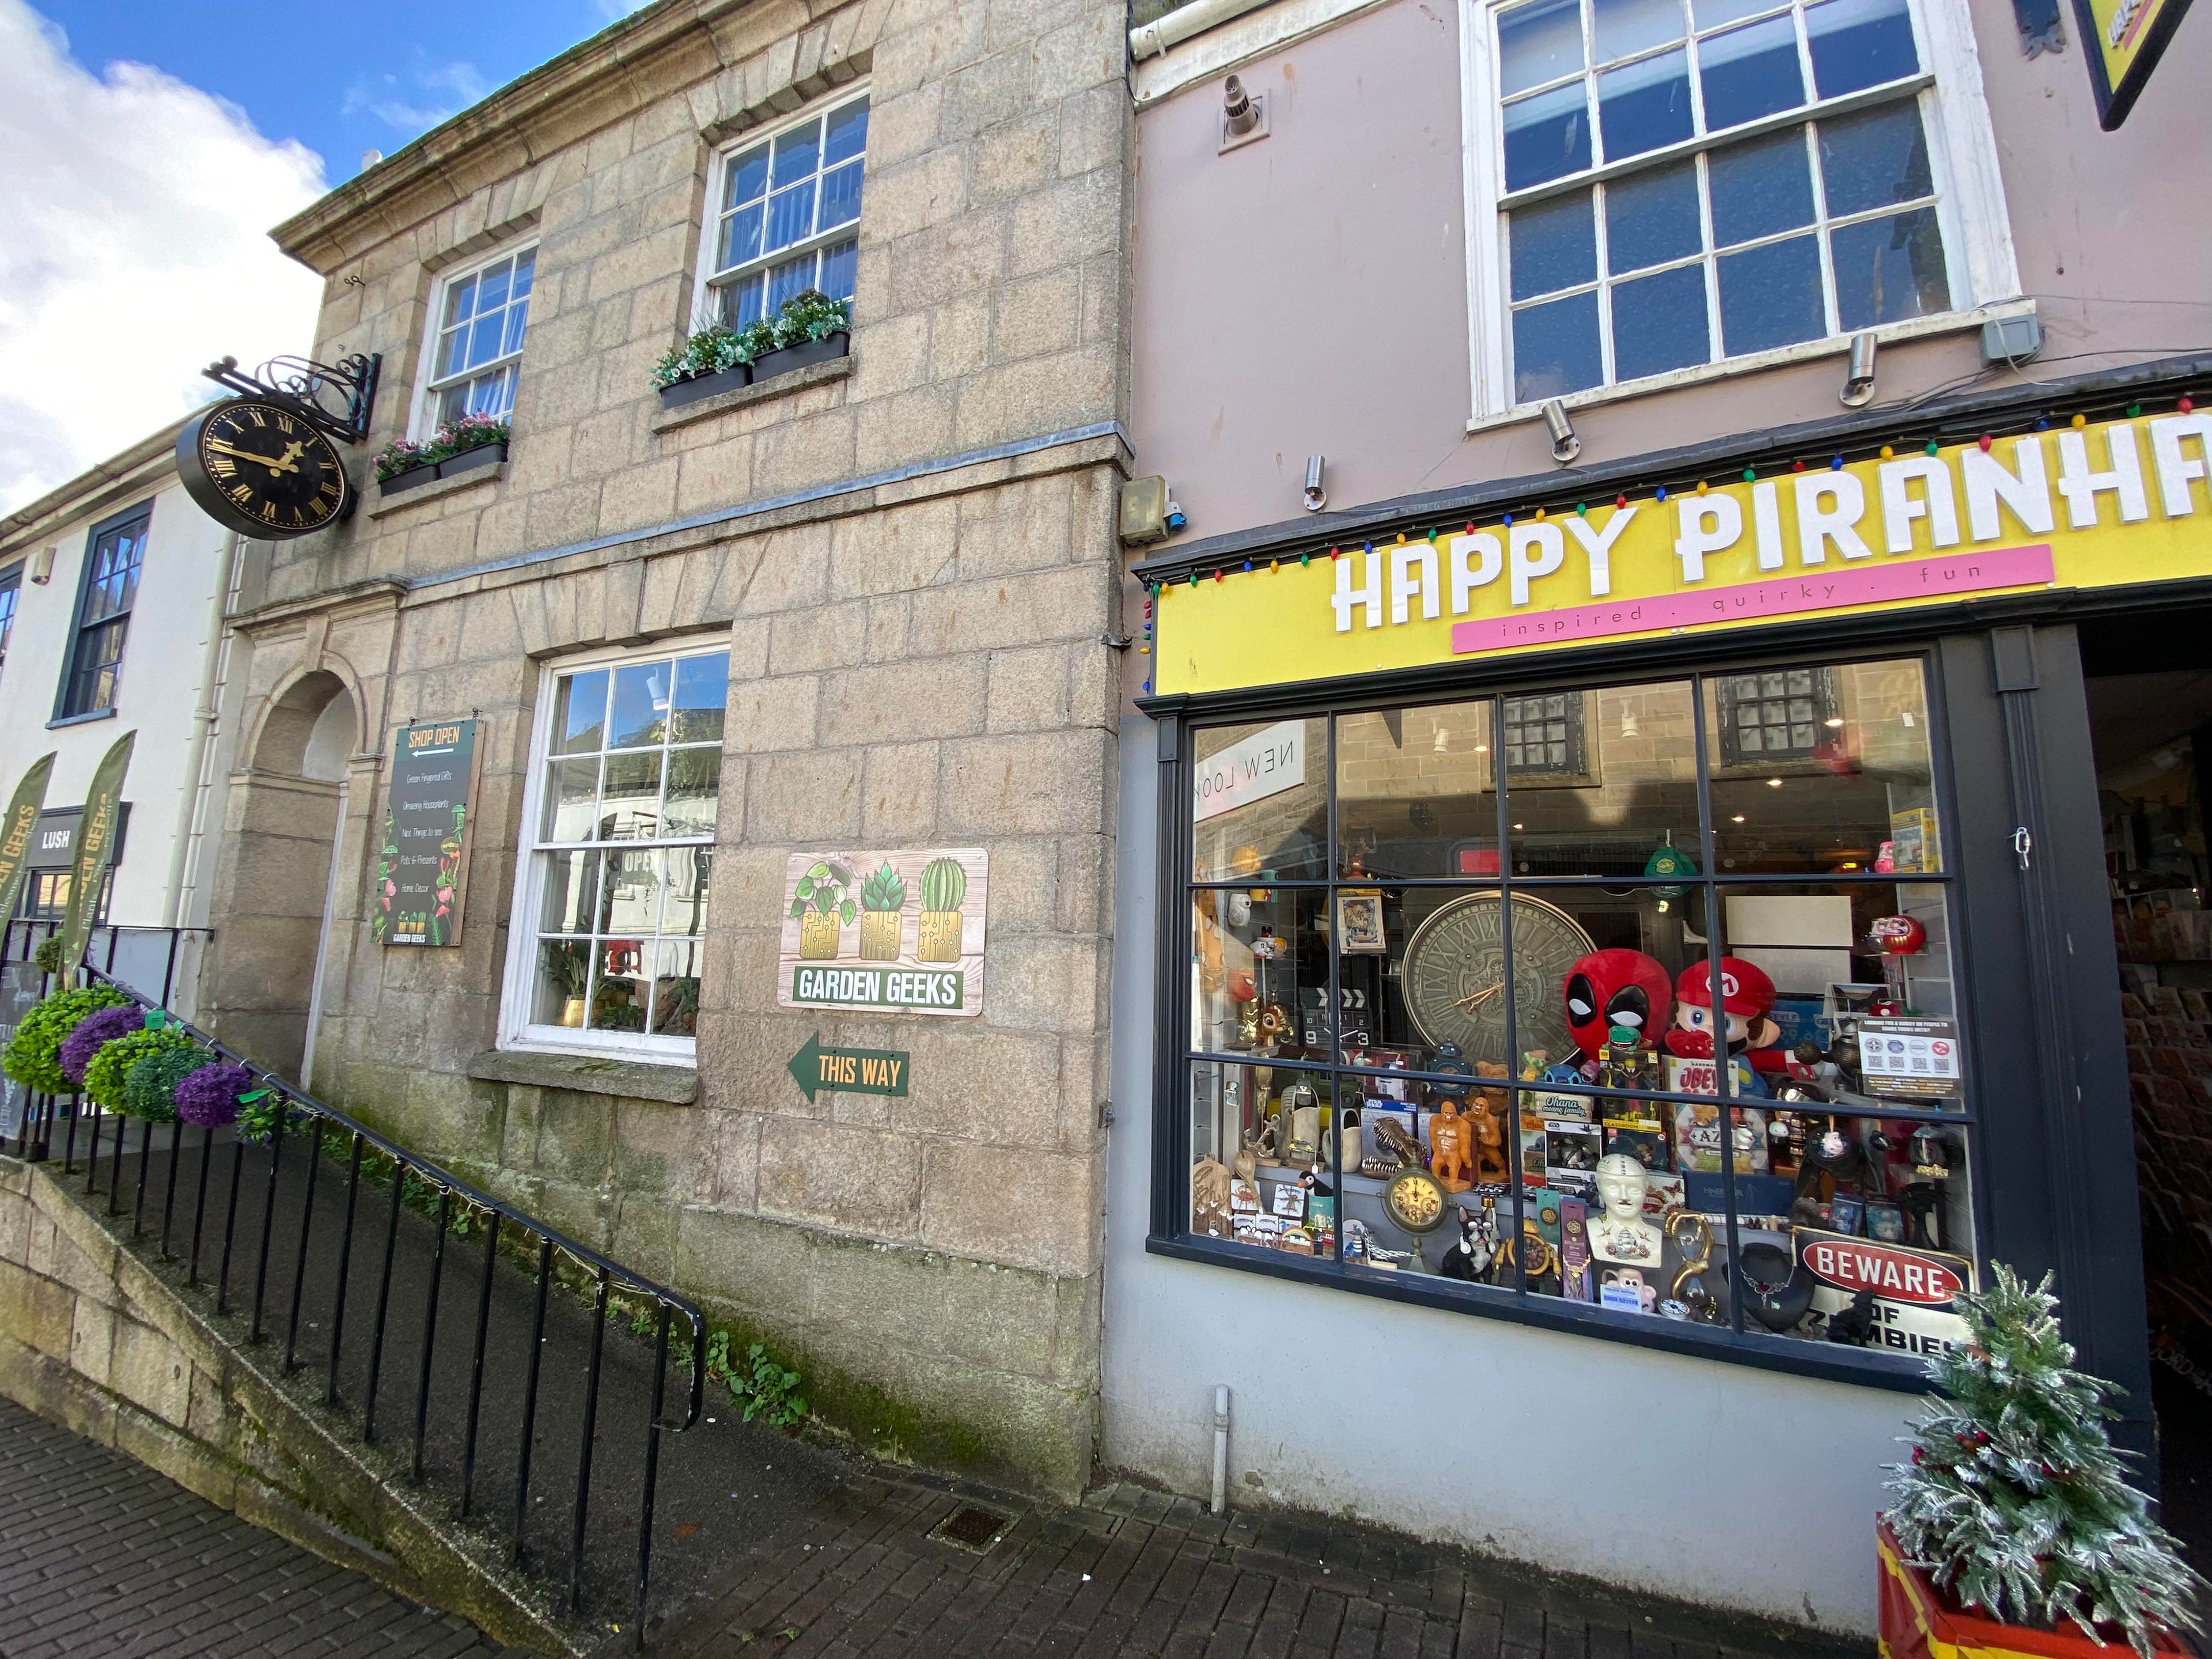 The outside entrance of the Happy Piranha and Garden Geeks stores in Truro, Cornwall.